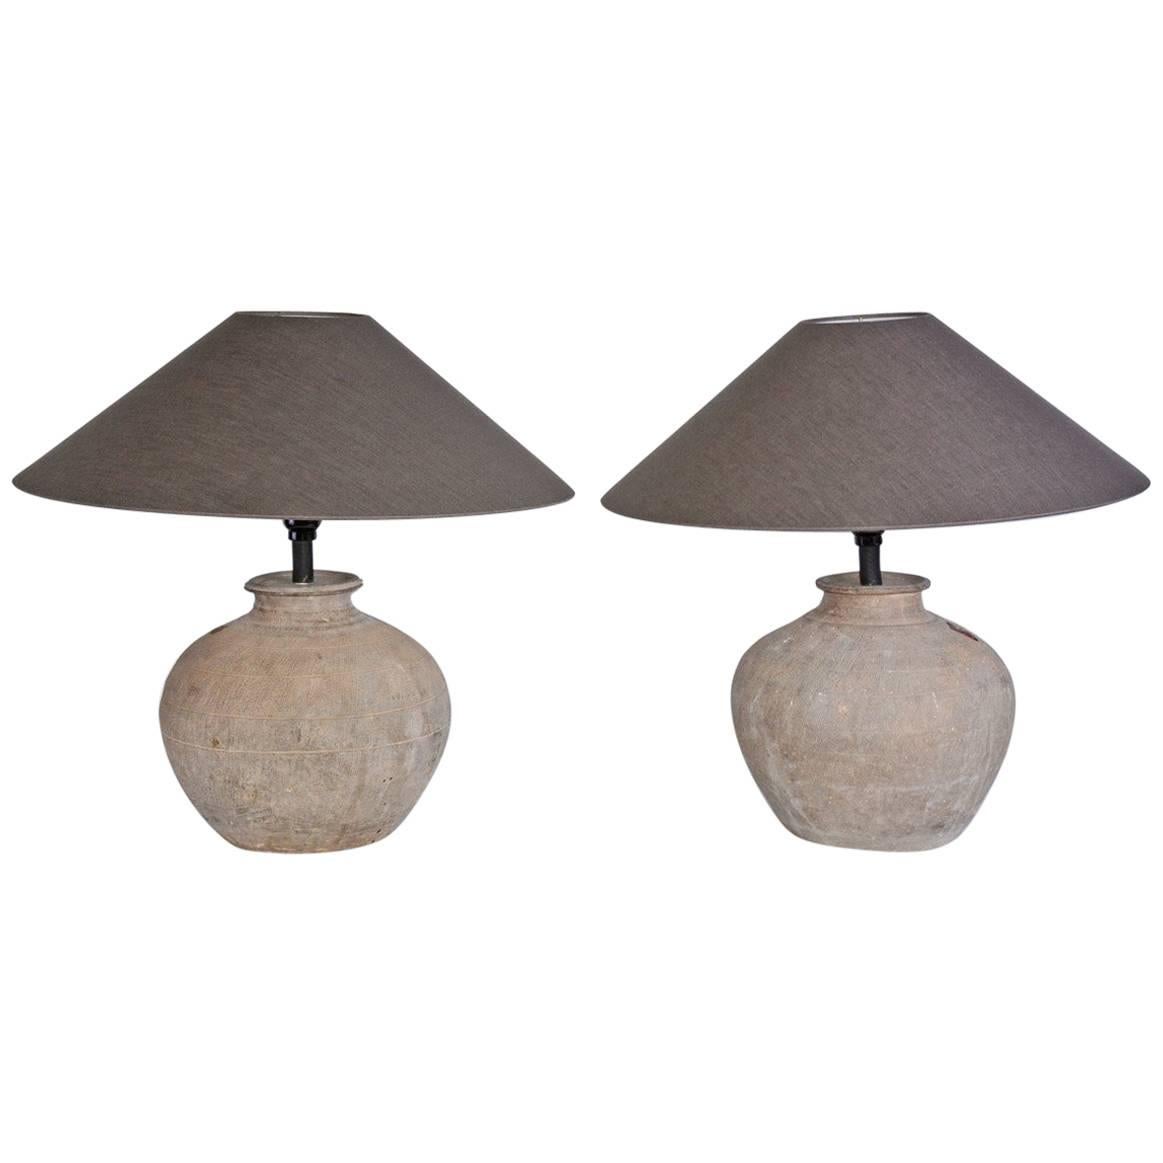 Pair of Antique Chinese Vessel Lamps With Shades